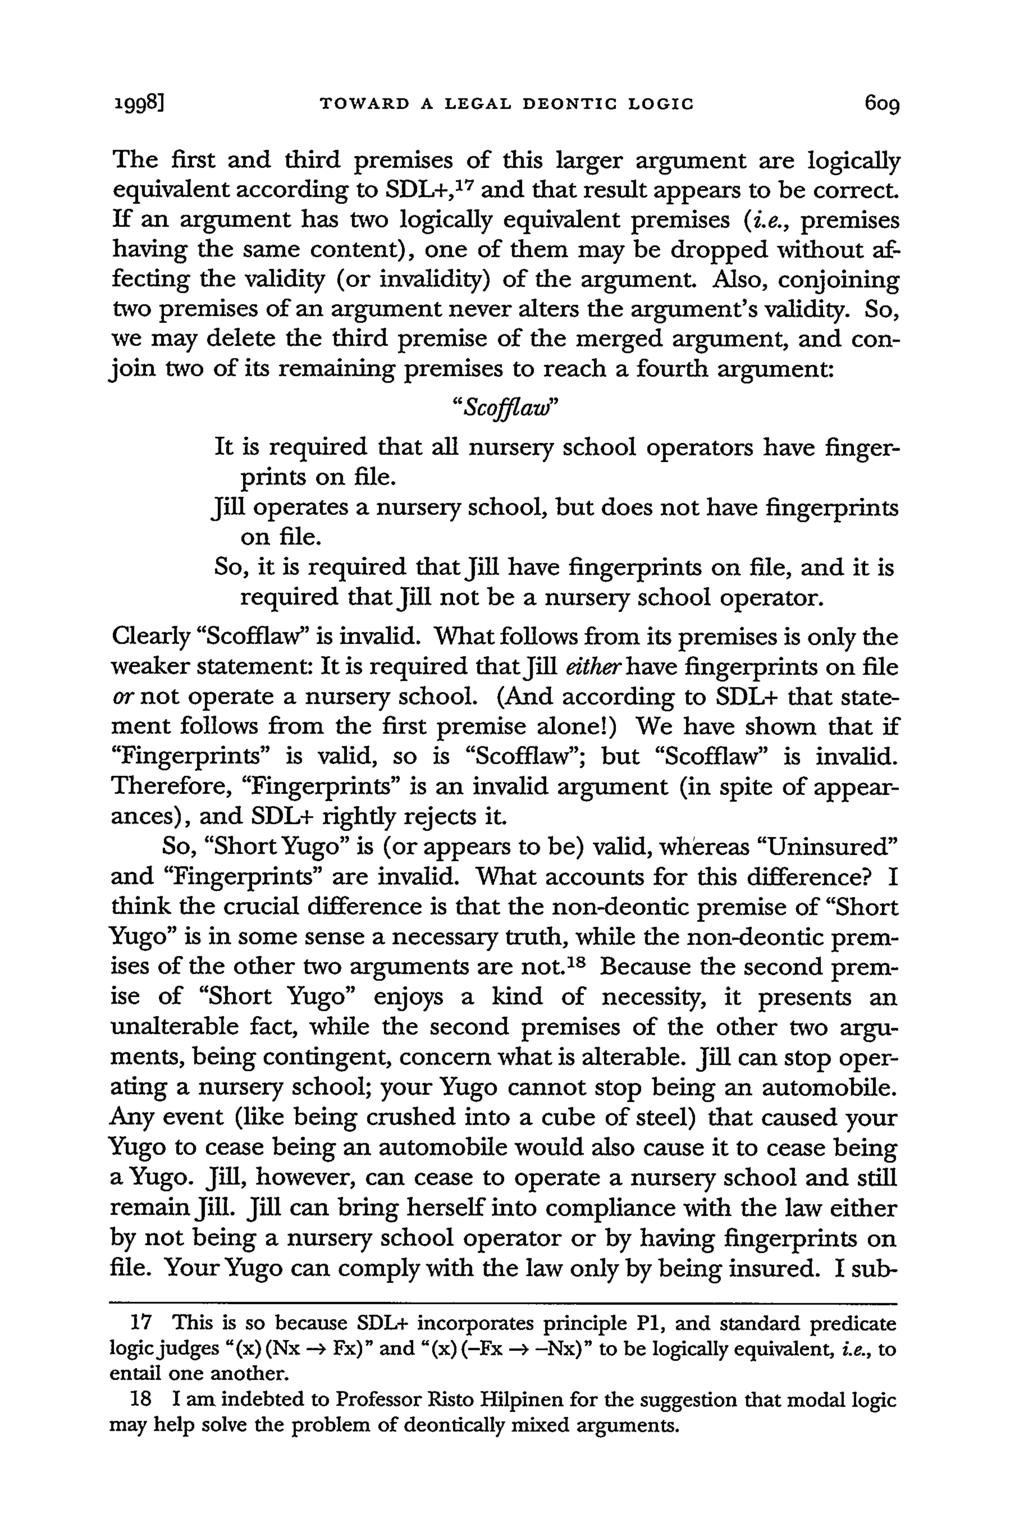 1998] TOWARD A LEGAL DEONTIC LOGIC The first and third premises of this larger argument are logically equivalent according to SDL+,' 7 and that result appears to be correct.